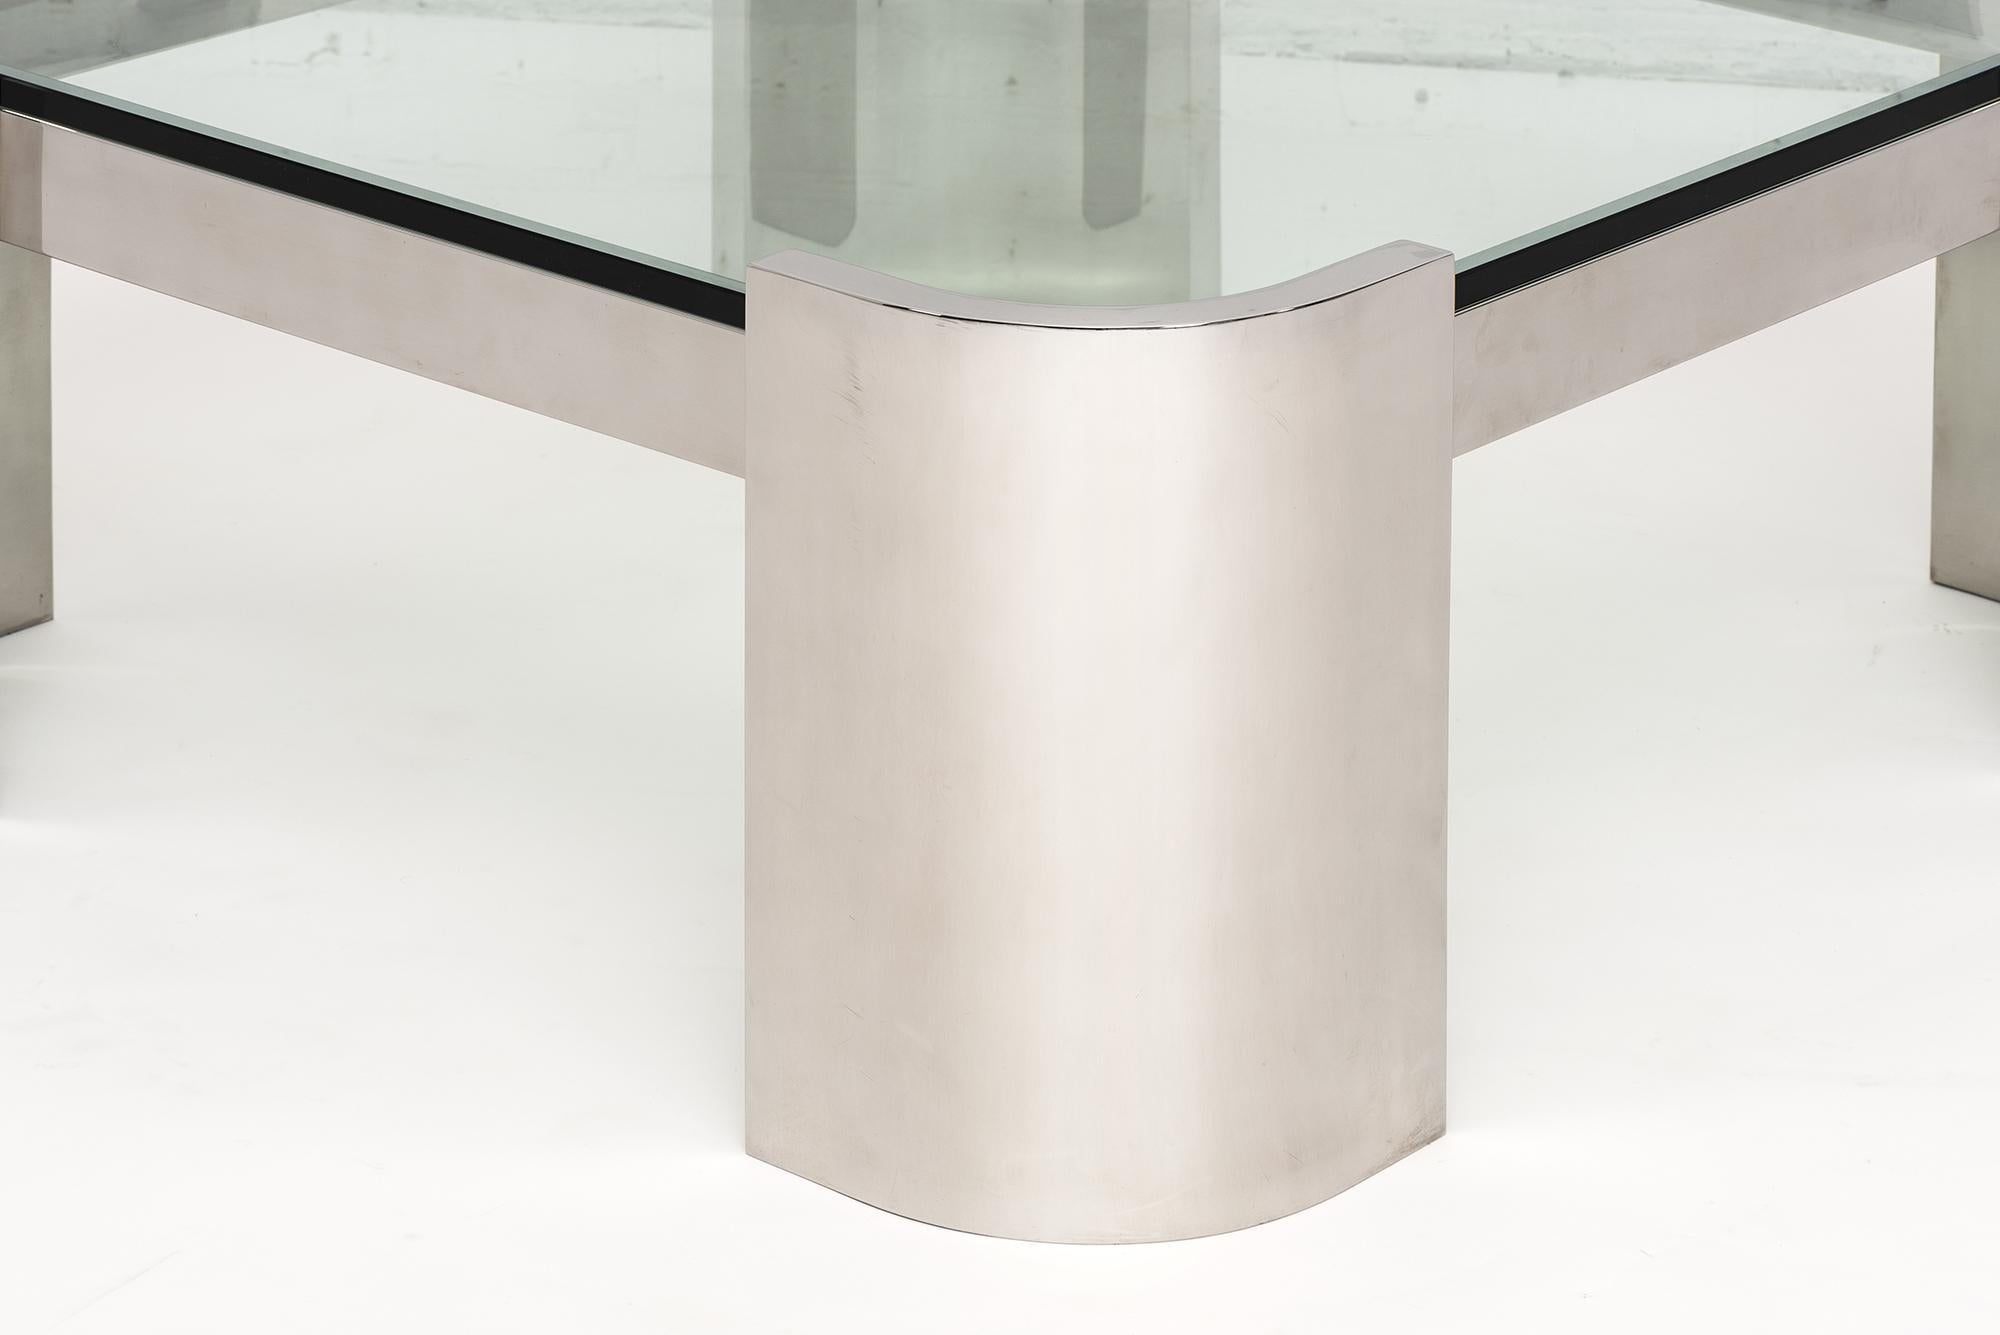 Late 20th Century Brueton Stainless Steel and Glass Top Coffee Table, 1970